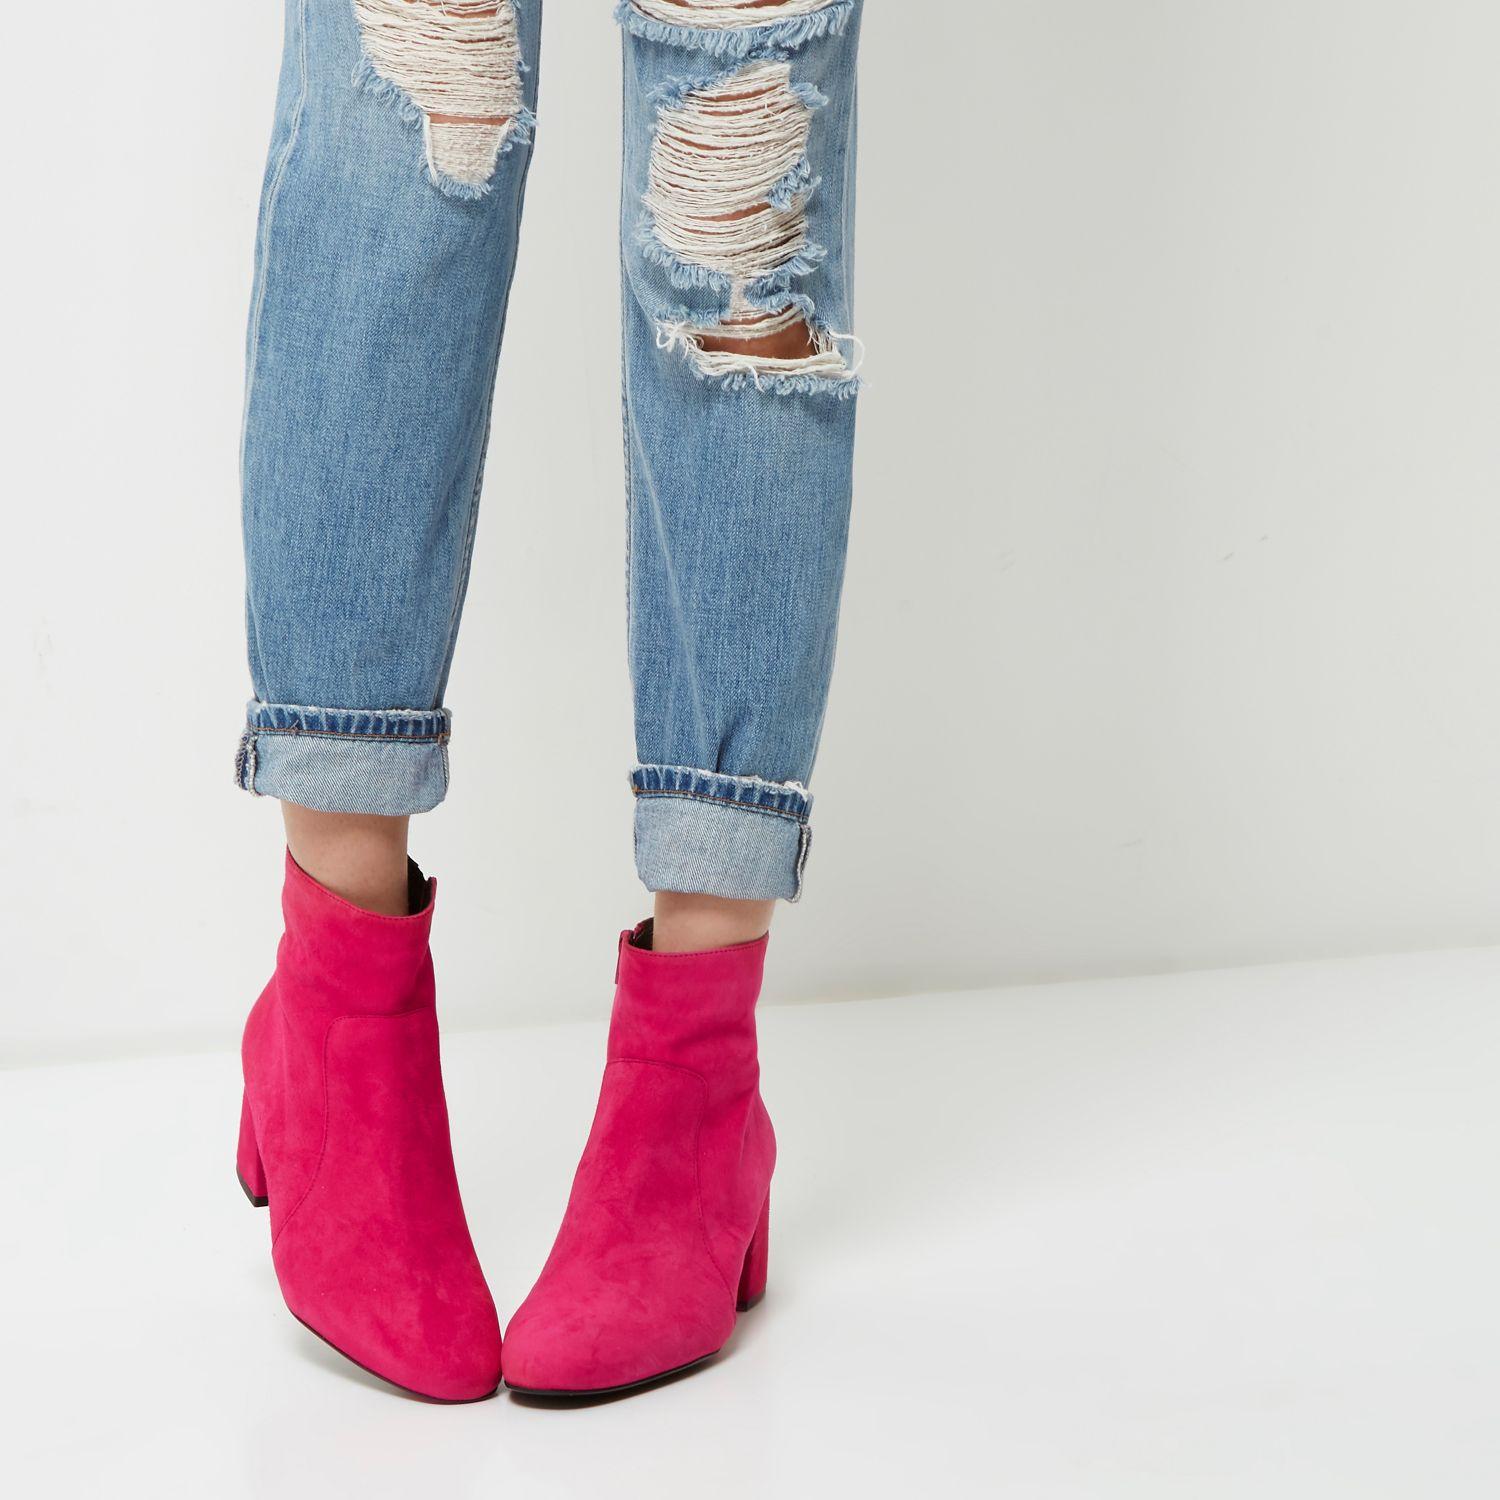 river island pink boots